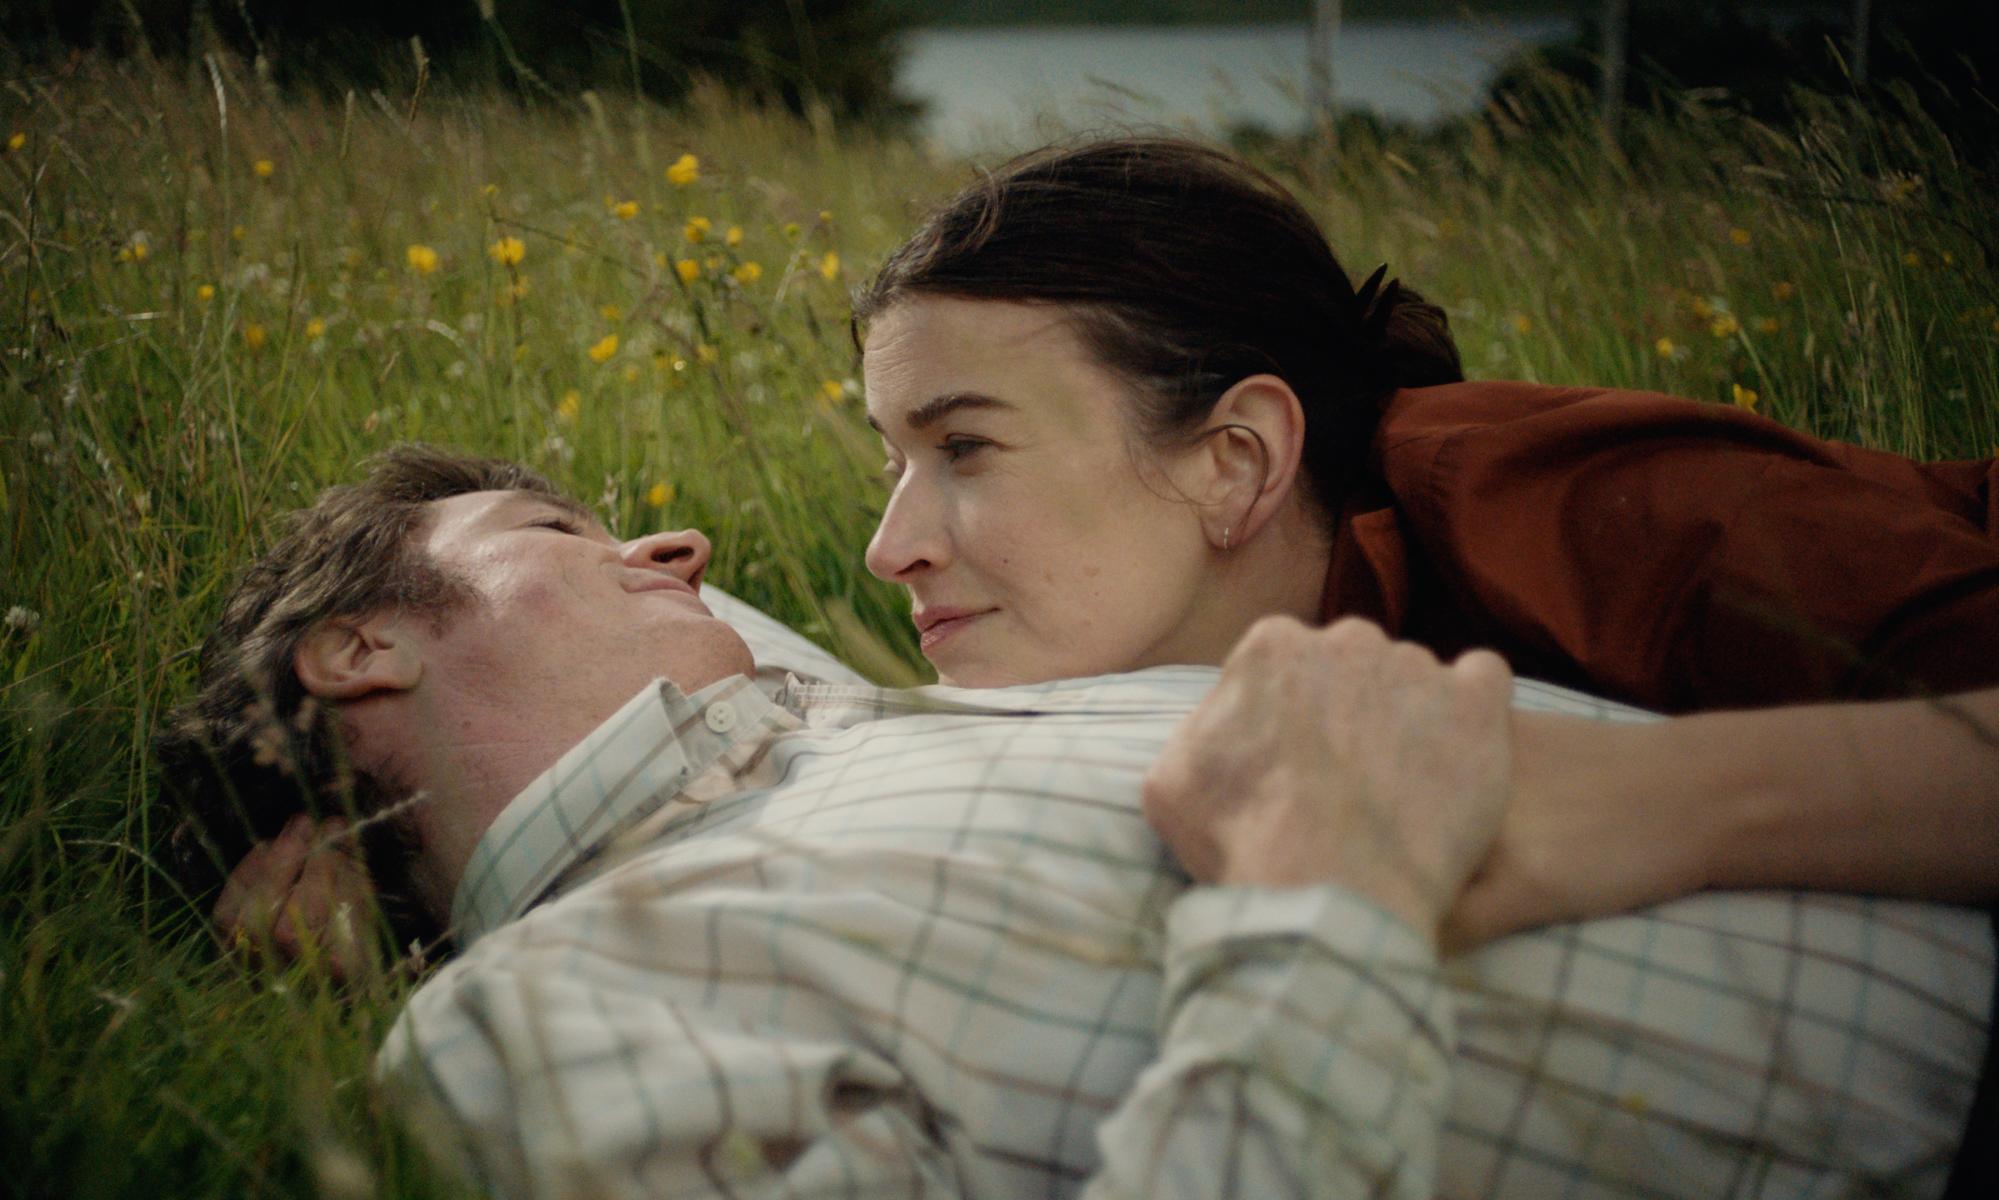 that they may face the rising sun review – poignant rural meditation on life and friendship